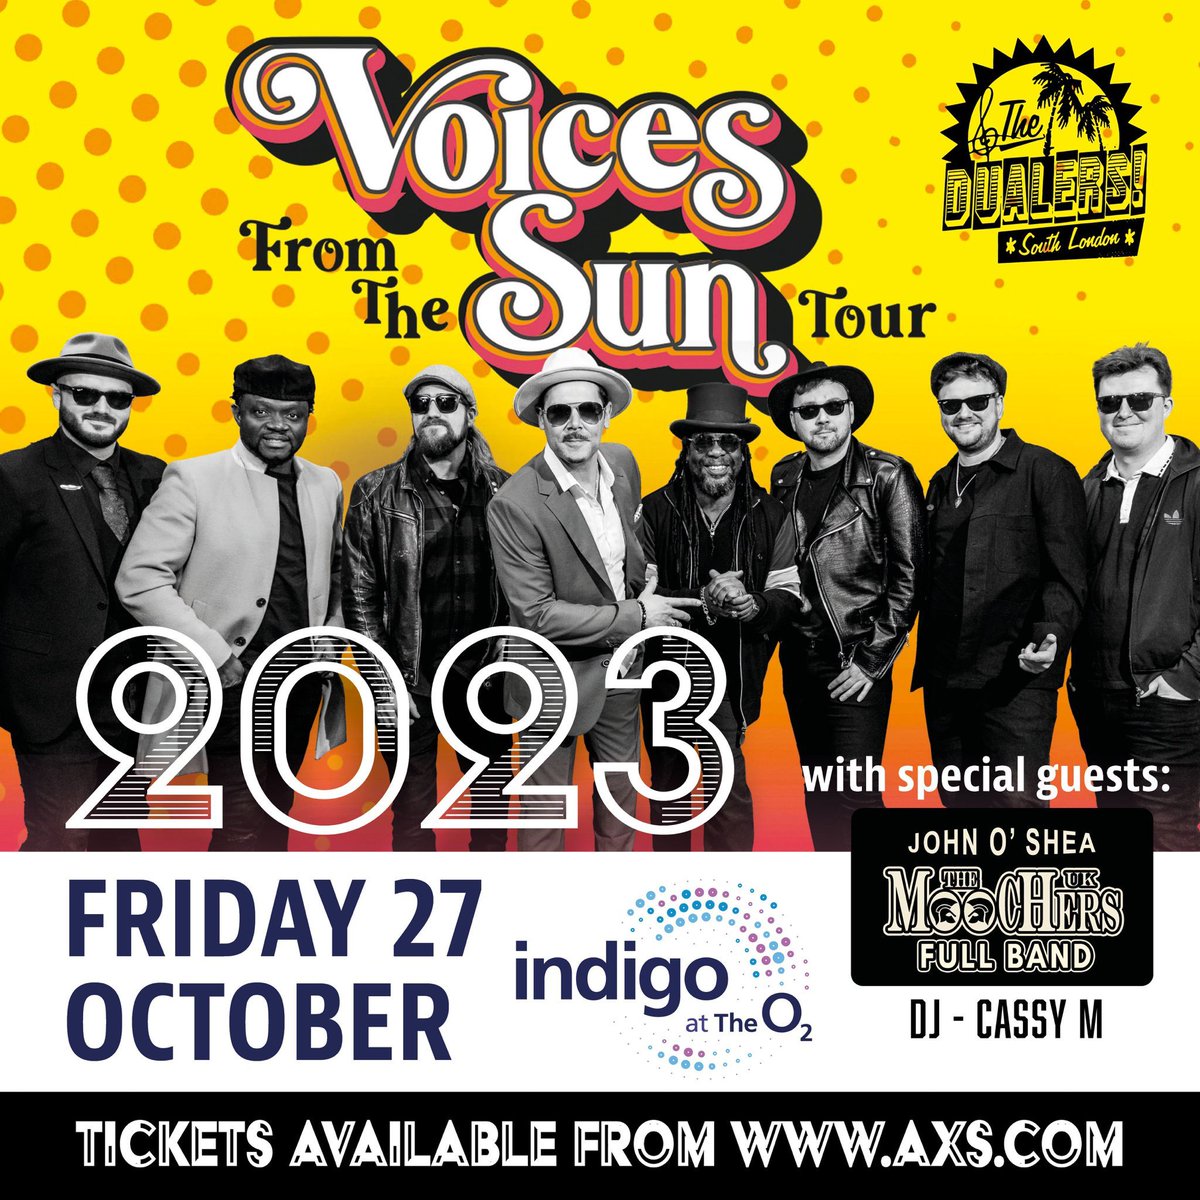 The Dualers return to London on 27th October at Indigo at the O2, promising an incredible night of live ska & reggae tunes! 🔥 Have you booked your tickets yet? 👉 ow.ly/GKPa50PIJLS